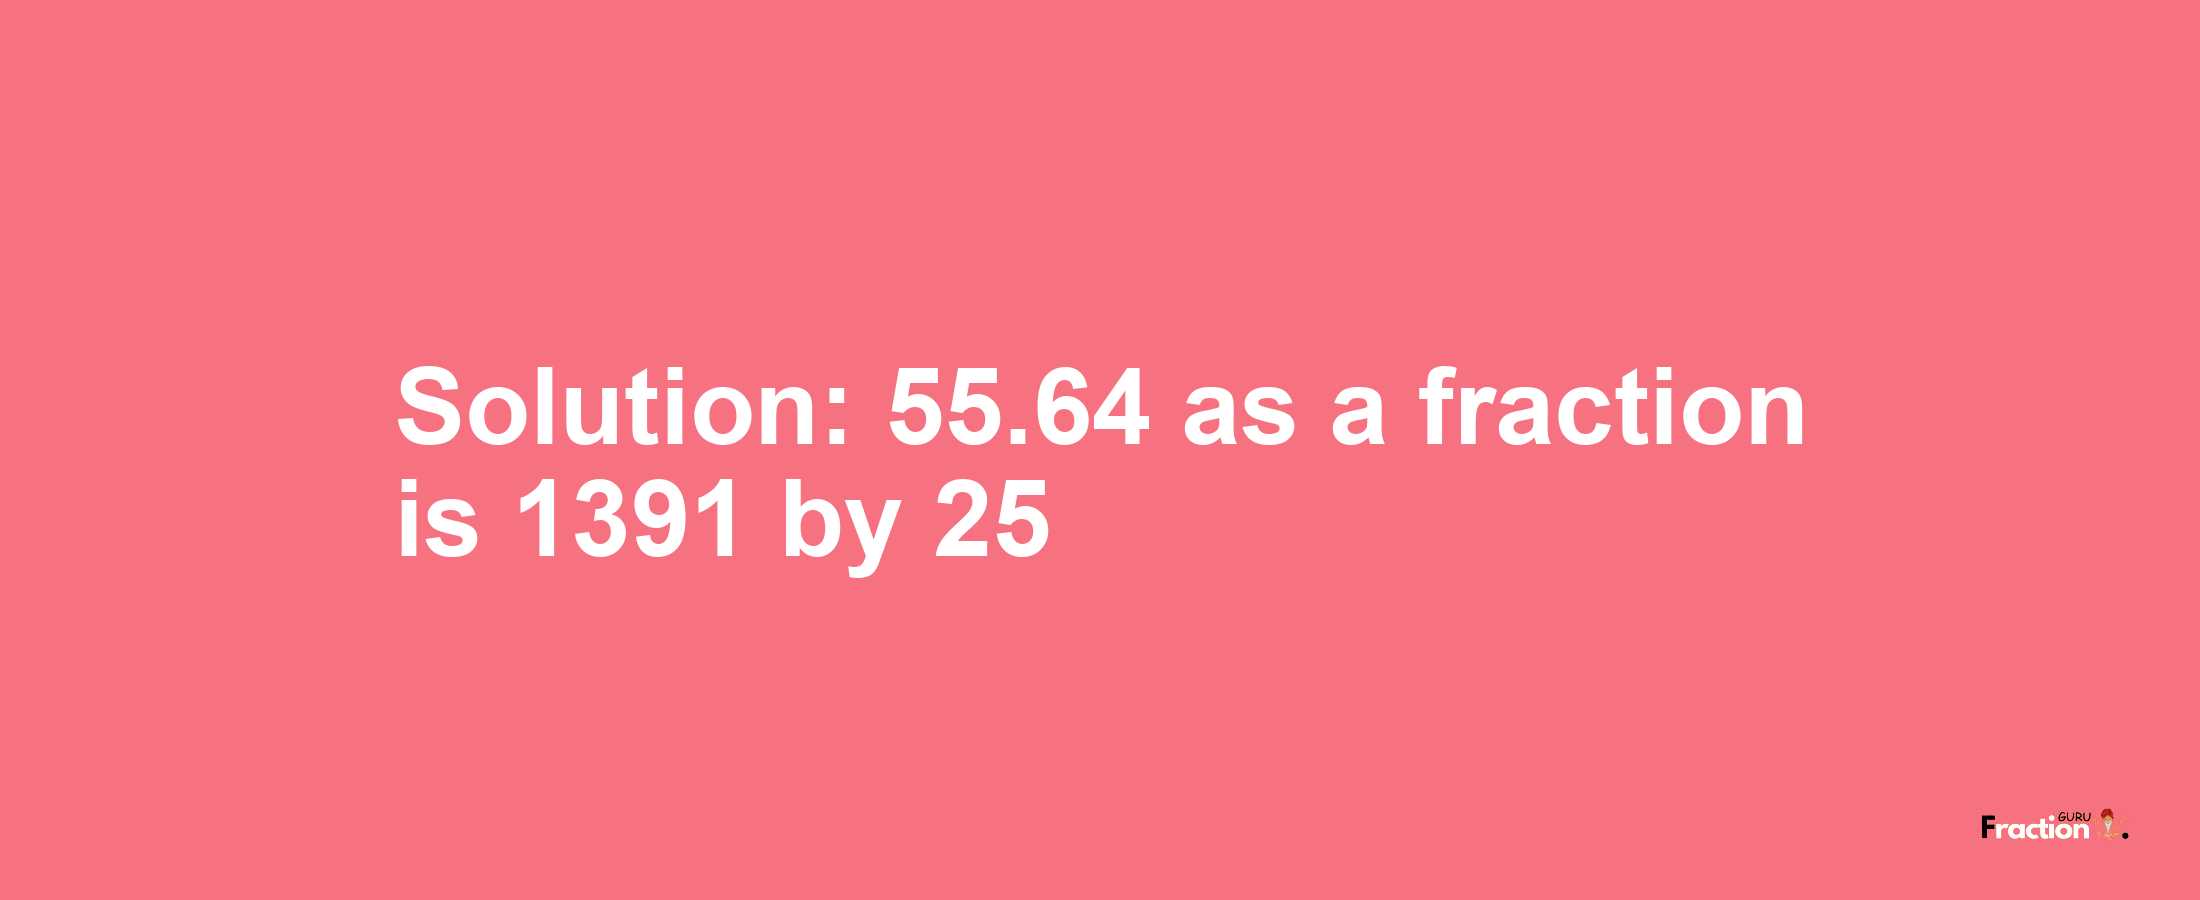 Solution:55.64 as a fraction is 1391/25